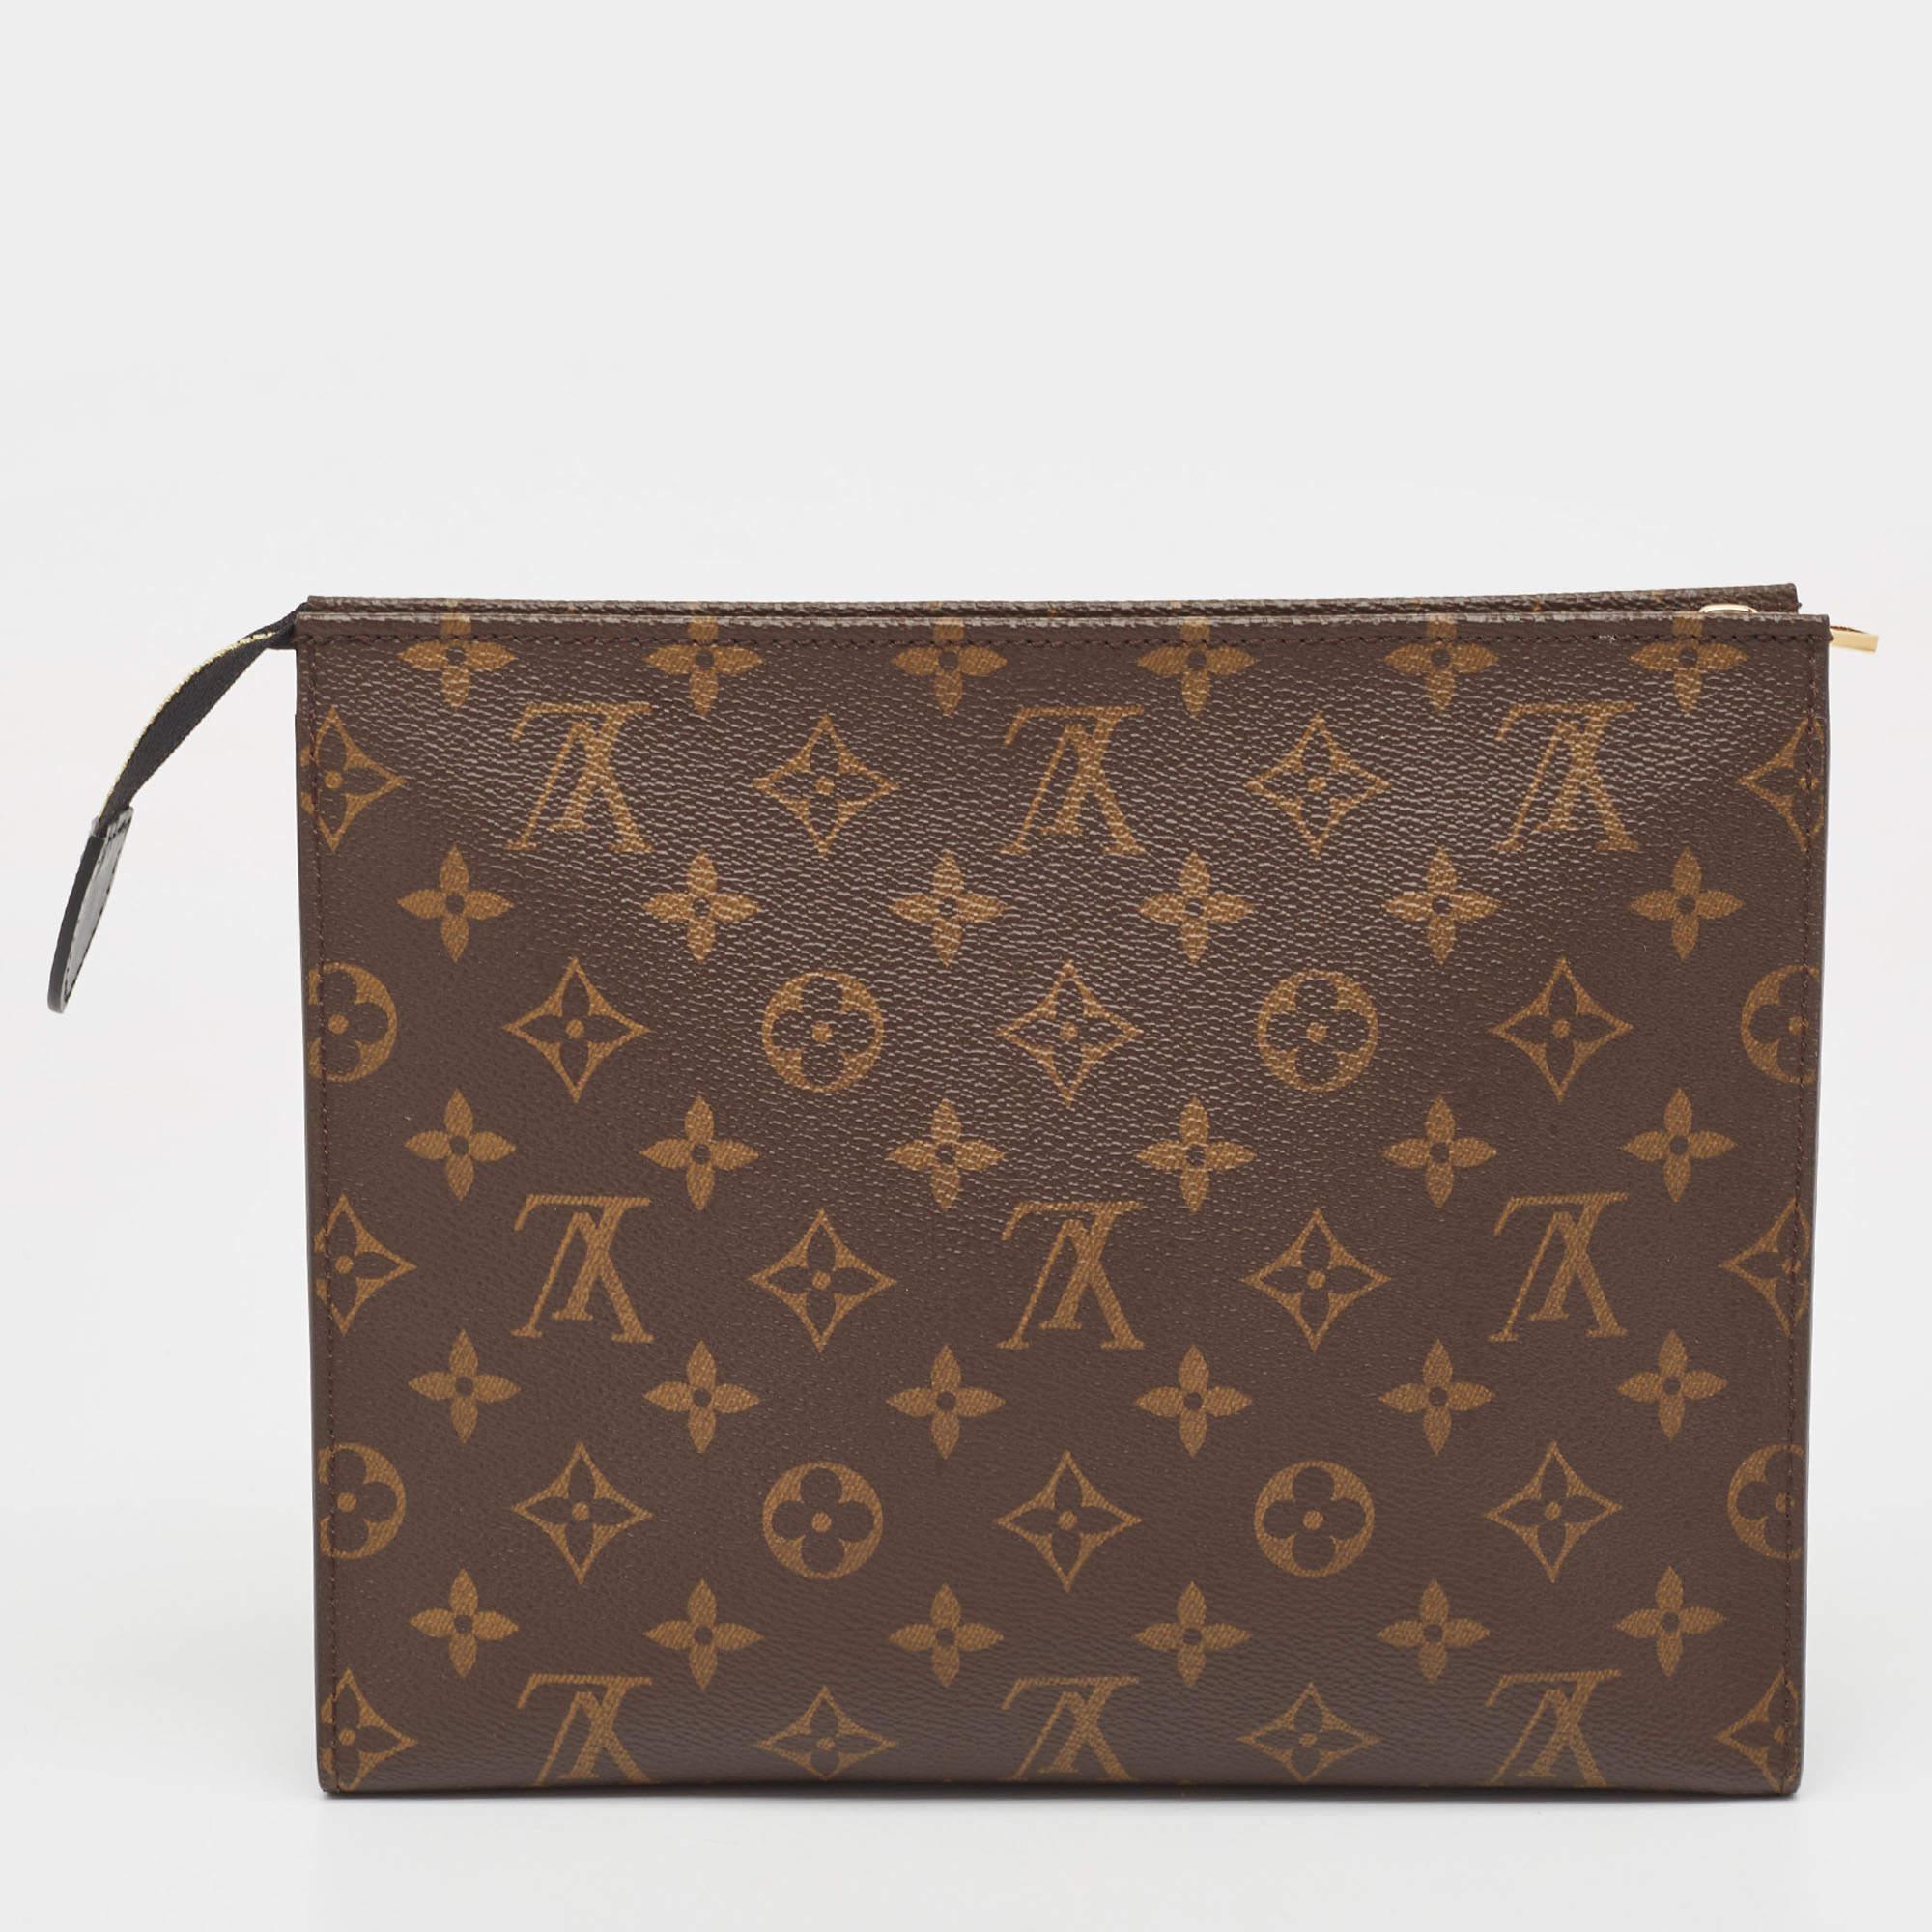 An essential wardrobe accessory, this Louis Vuitton pouch is a must-have. Made from the signature monogram canvas, it looks visually aesthetic and its interior will keep your stuff safely.

